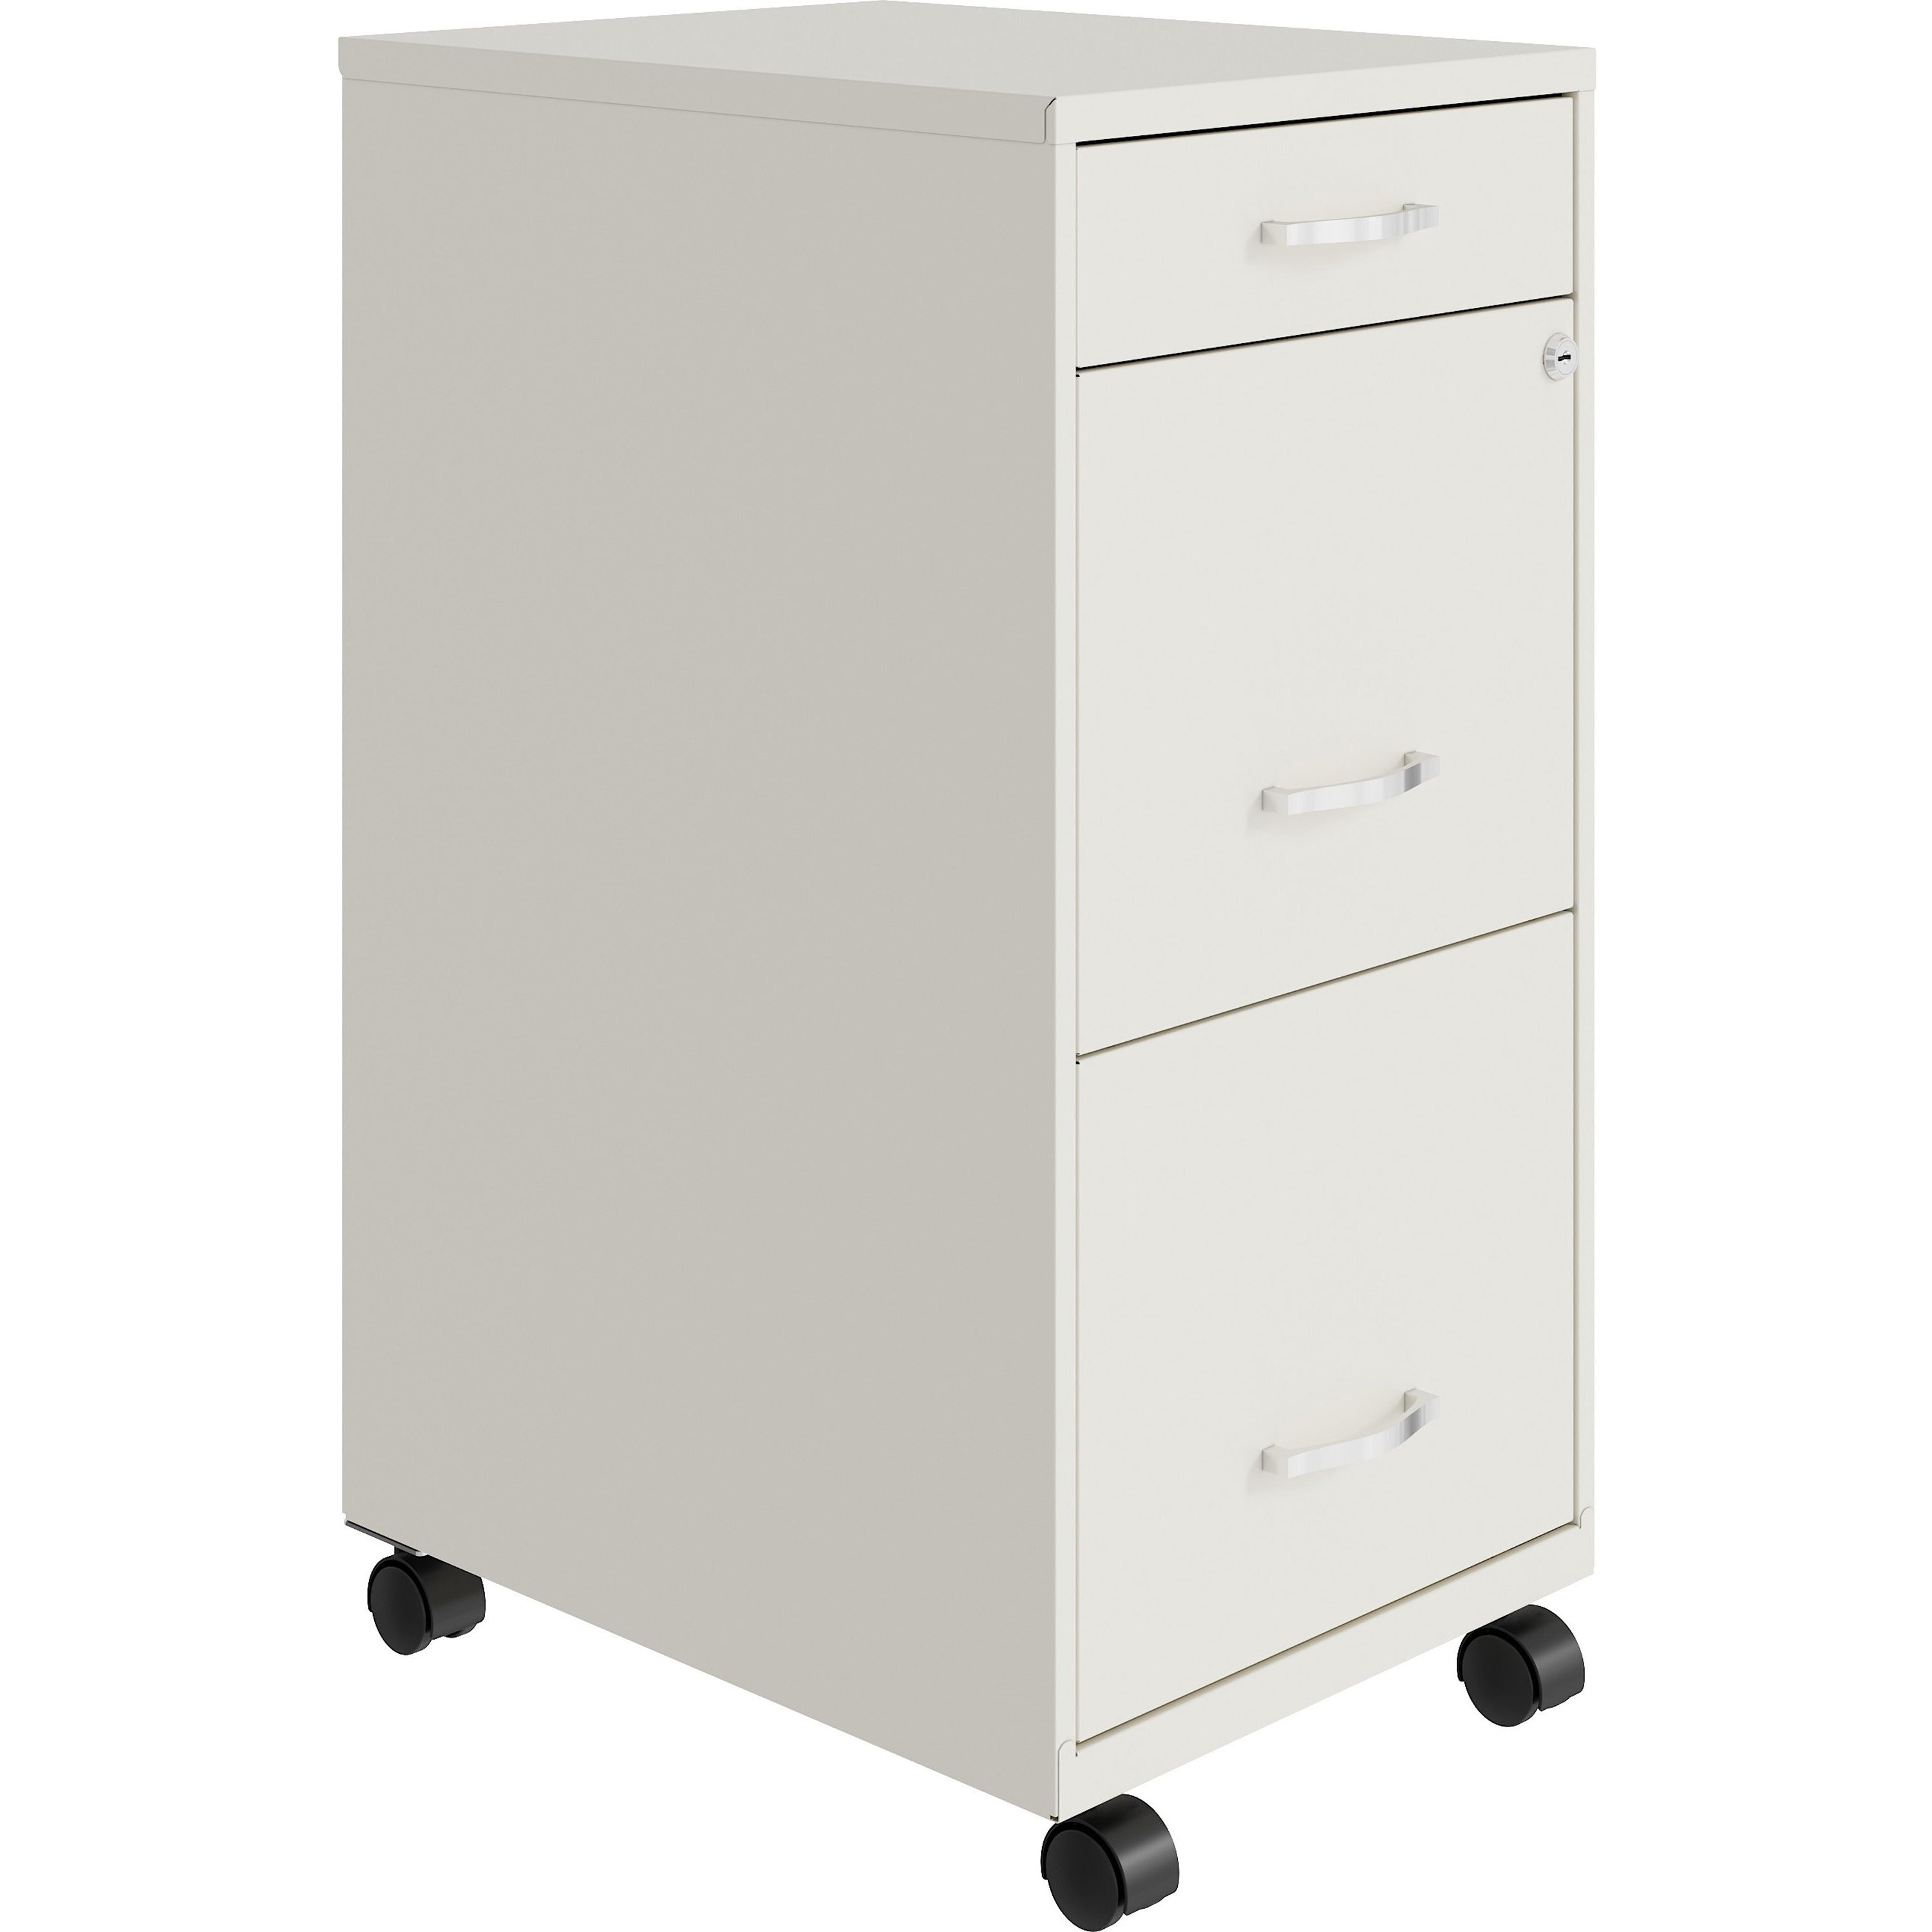 nusparc-mobile-file-cabinet-142-x-18-x-295-3-x-drawers-for-file-box-letter-mobility-locking-drawer-glide-suspension-3-4-drawer-extension-cam-lock-nonporous-surface-white-painted-steel-recycled_nprvf318bmwe - 1